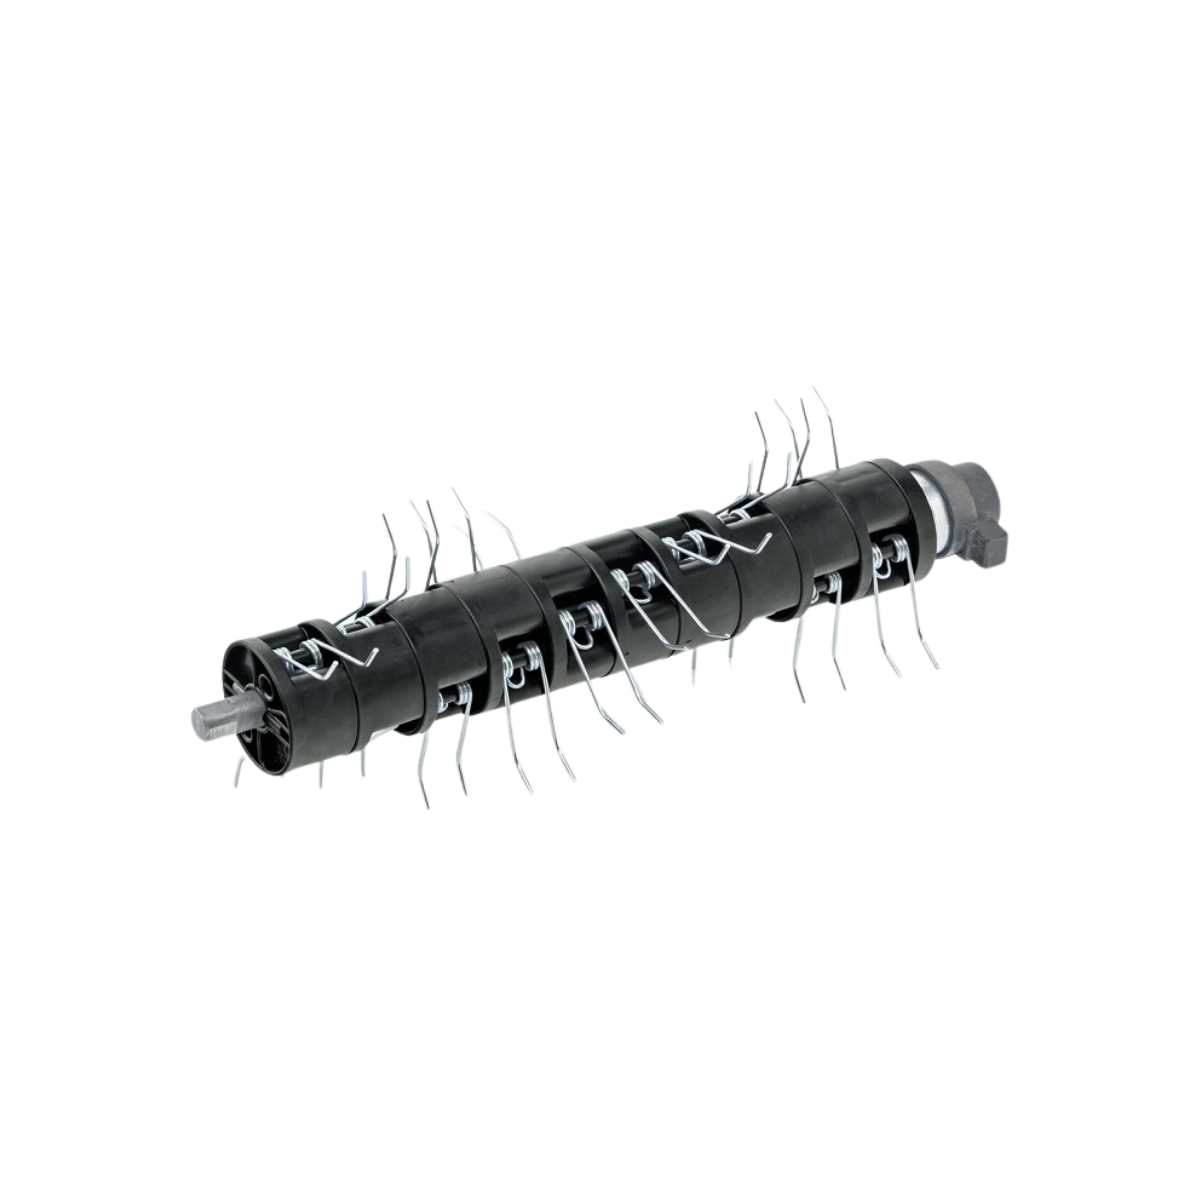 Aeration roller with springs for AL-KO scarifier